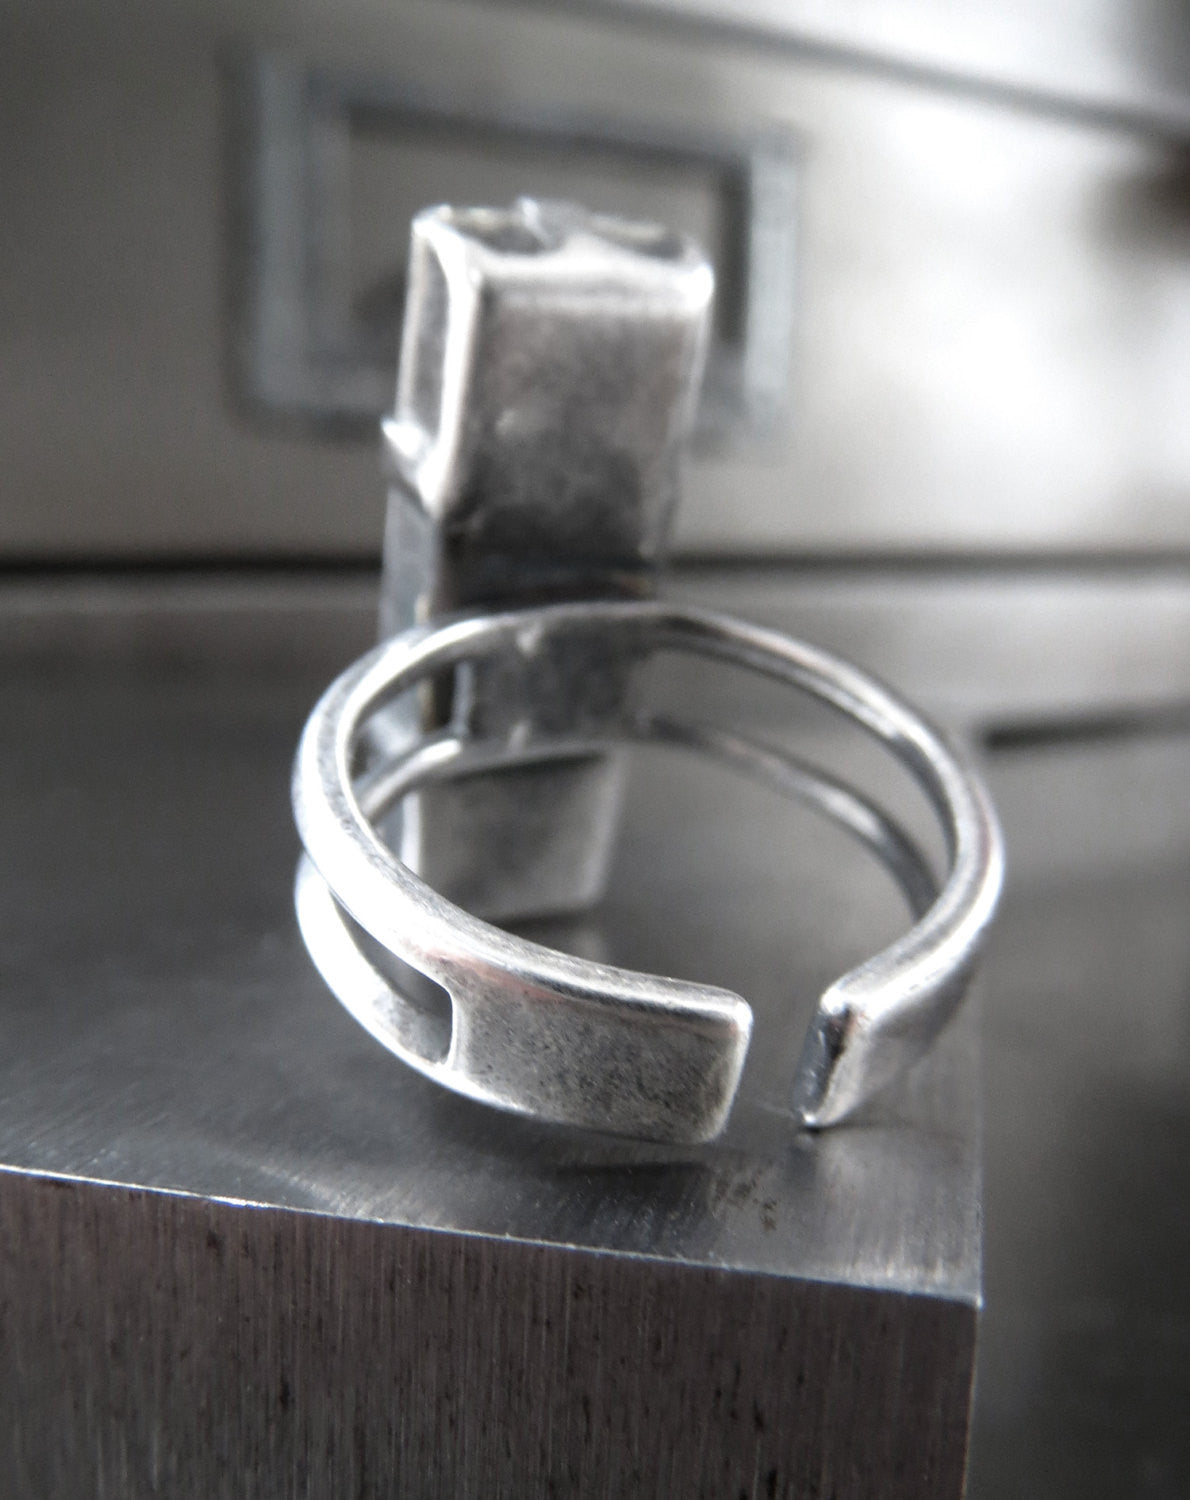 Modern Architectural Crystal Ring - Clear Crystal